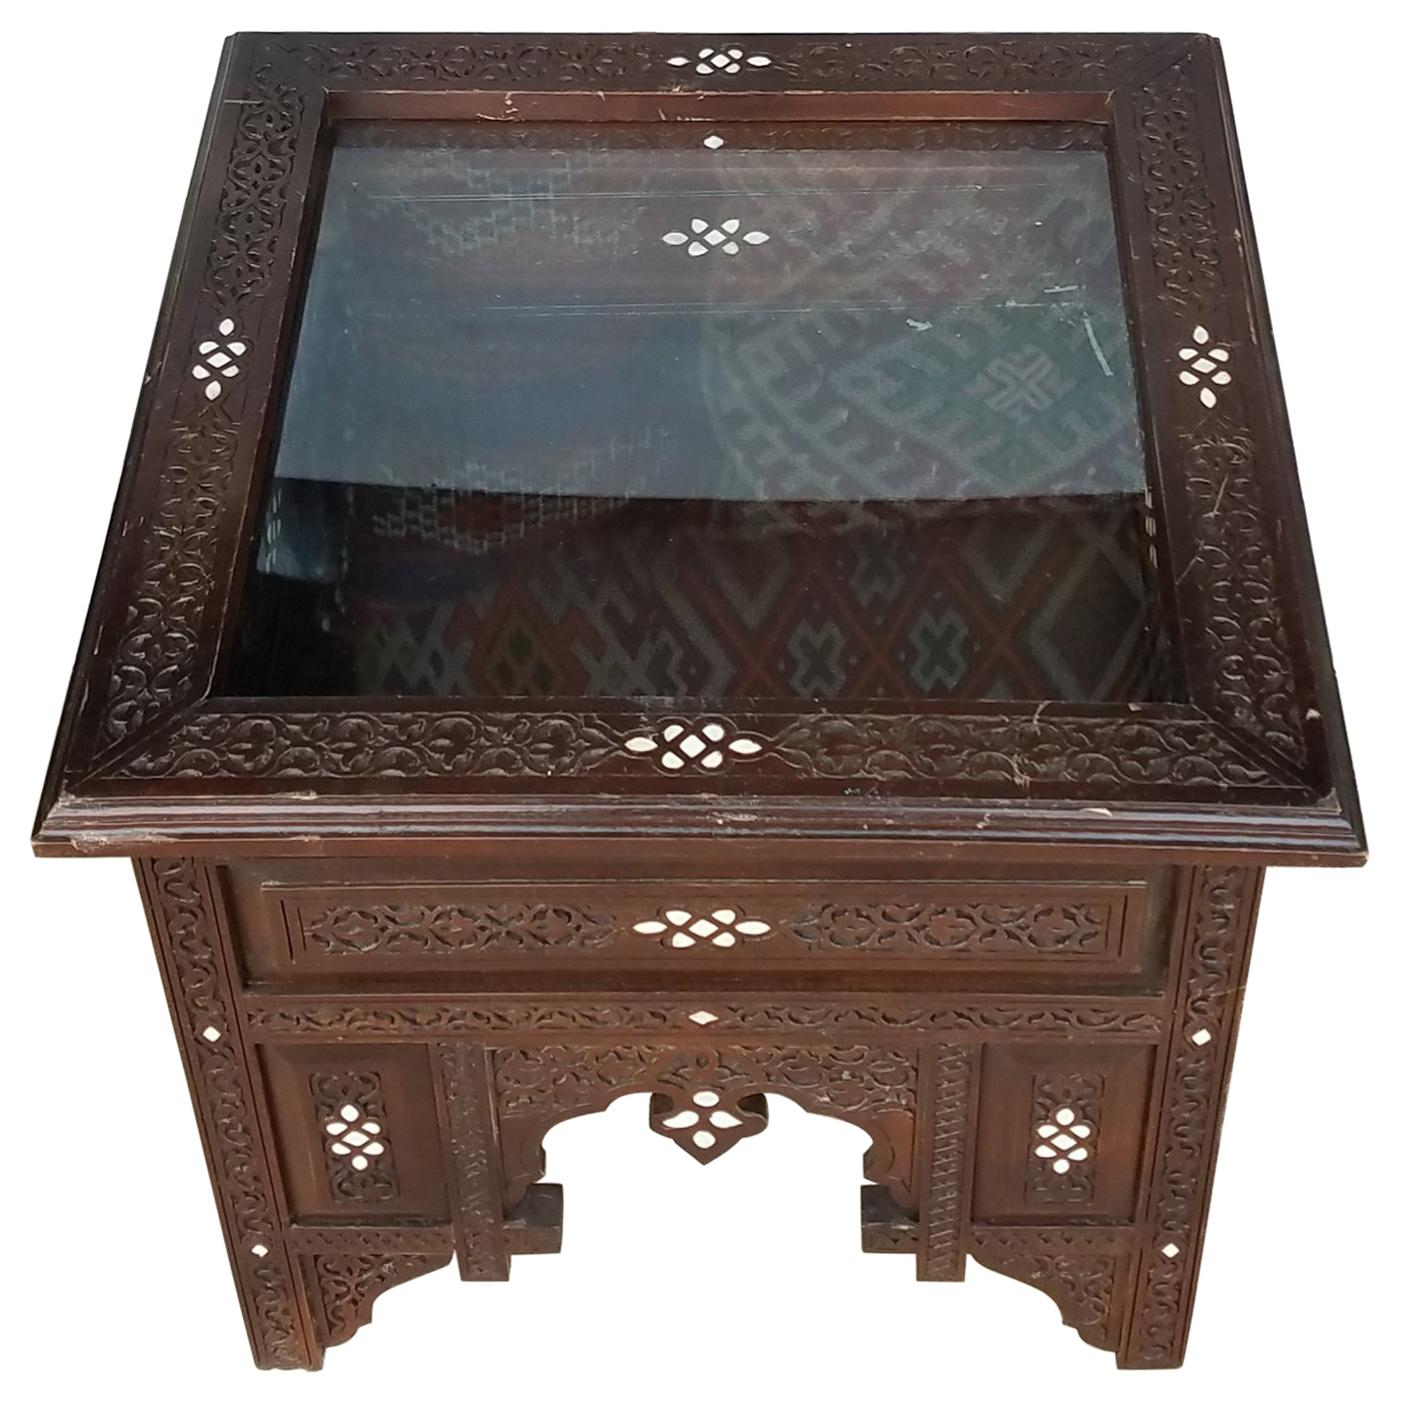 Syrian Moroccan Mother of Pearl Side Table or Display Case